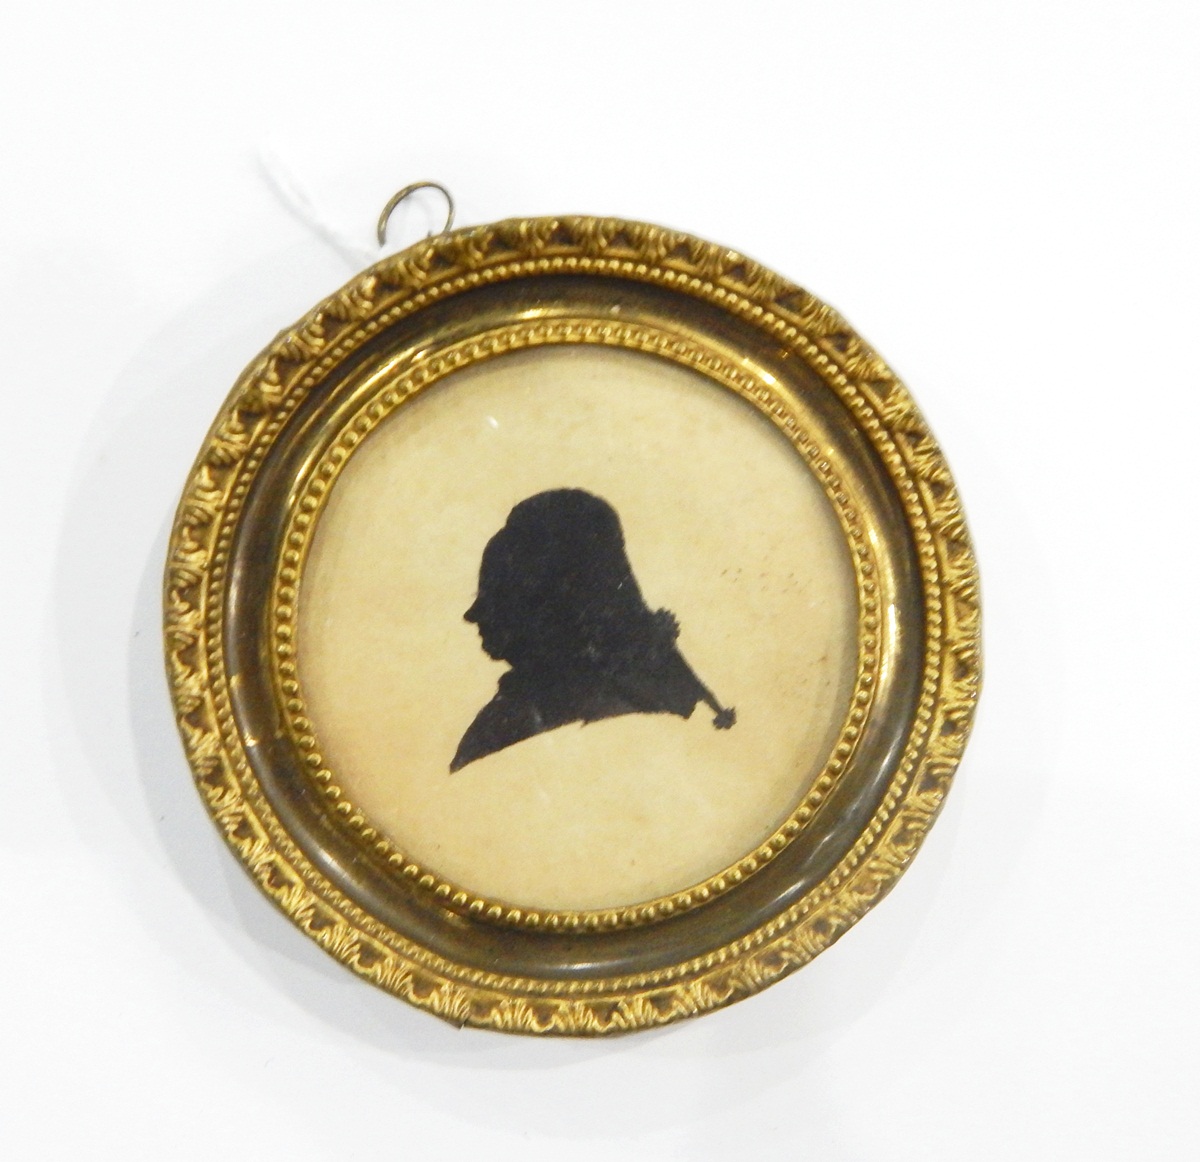 Late 18th/early 19th century silhouette portrait of a gentleman's head and shoulders, circular, 6.